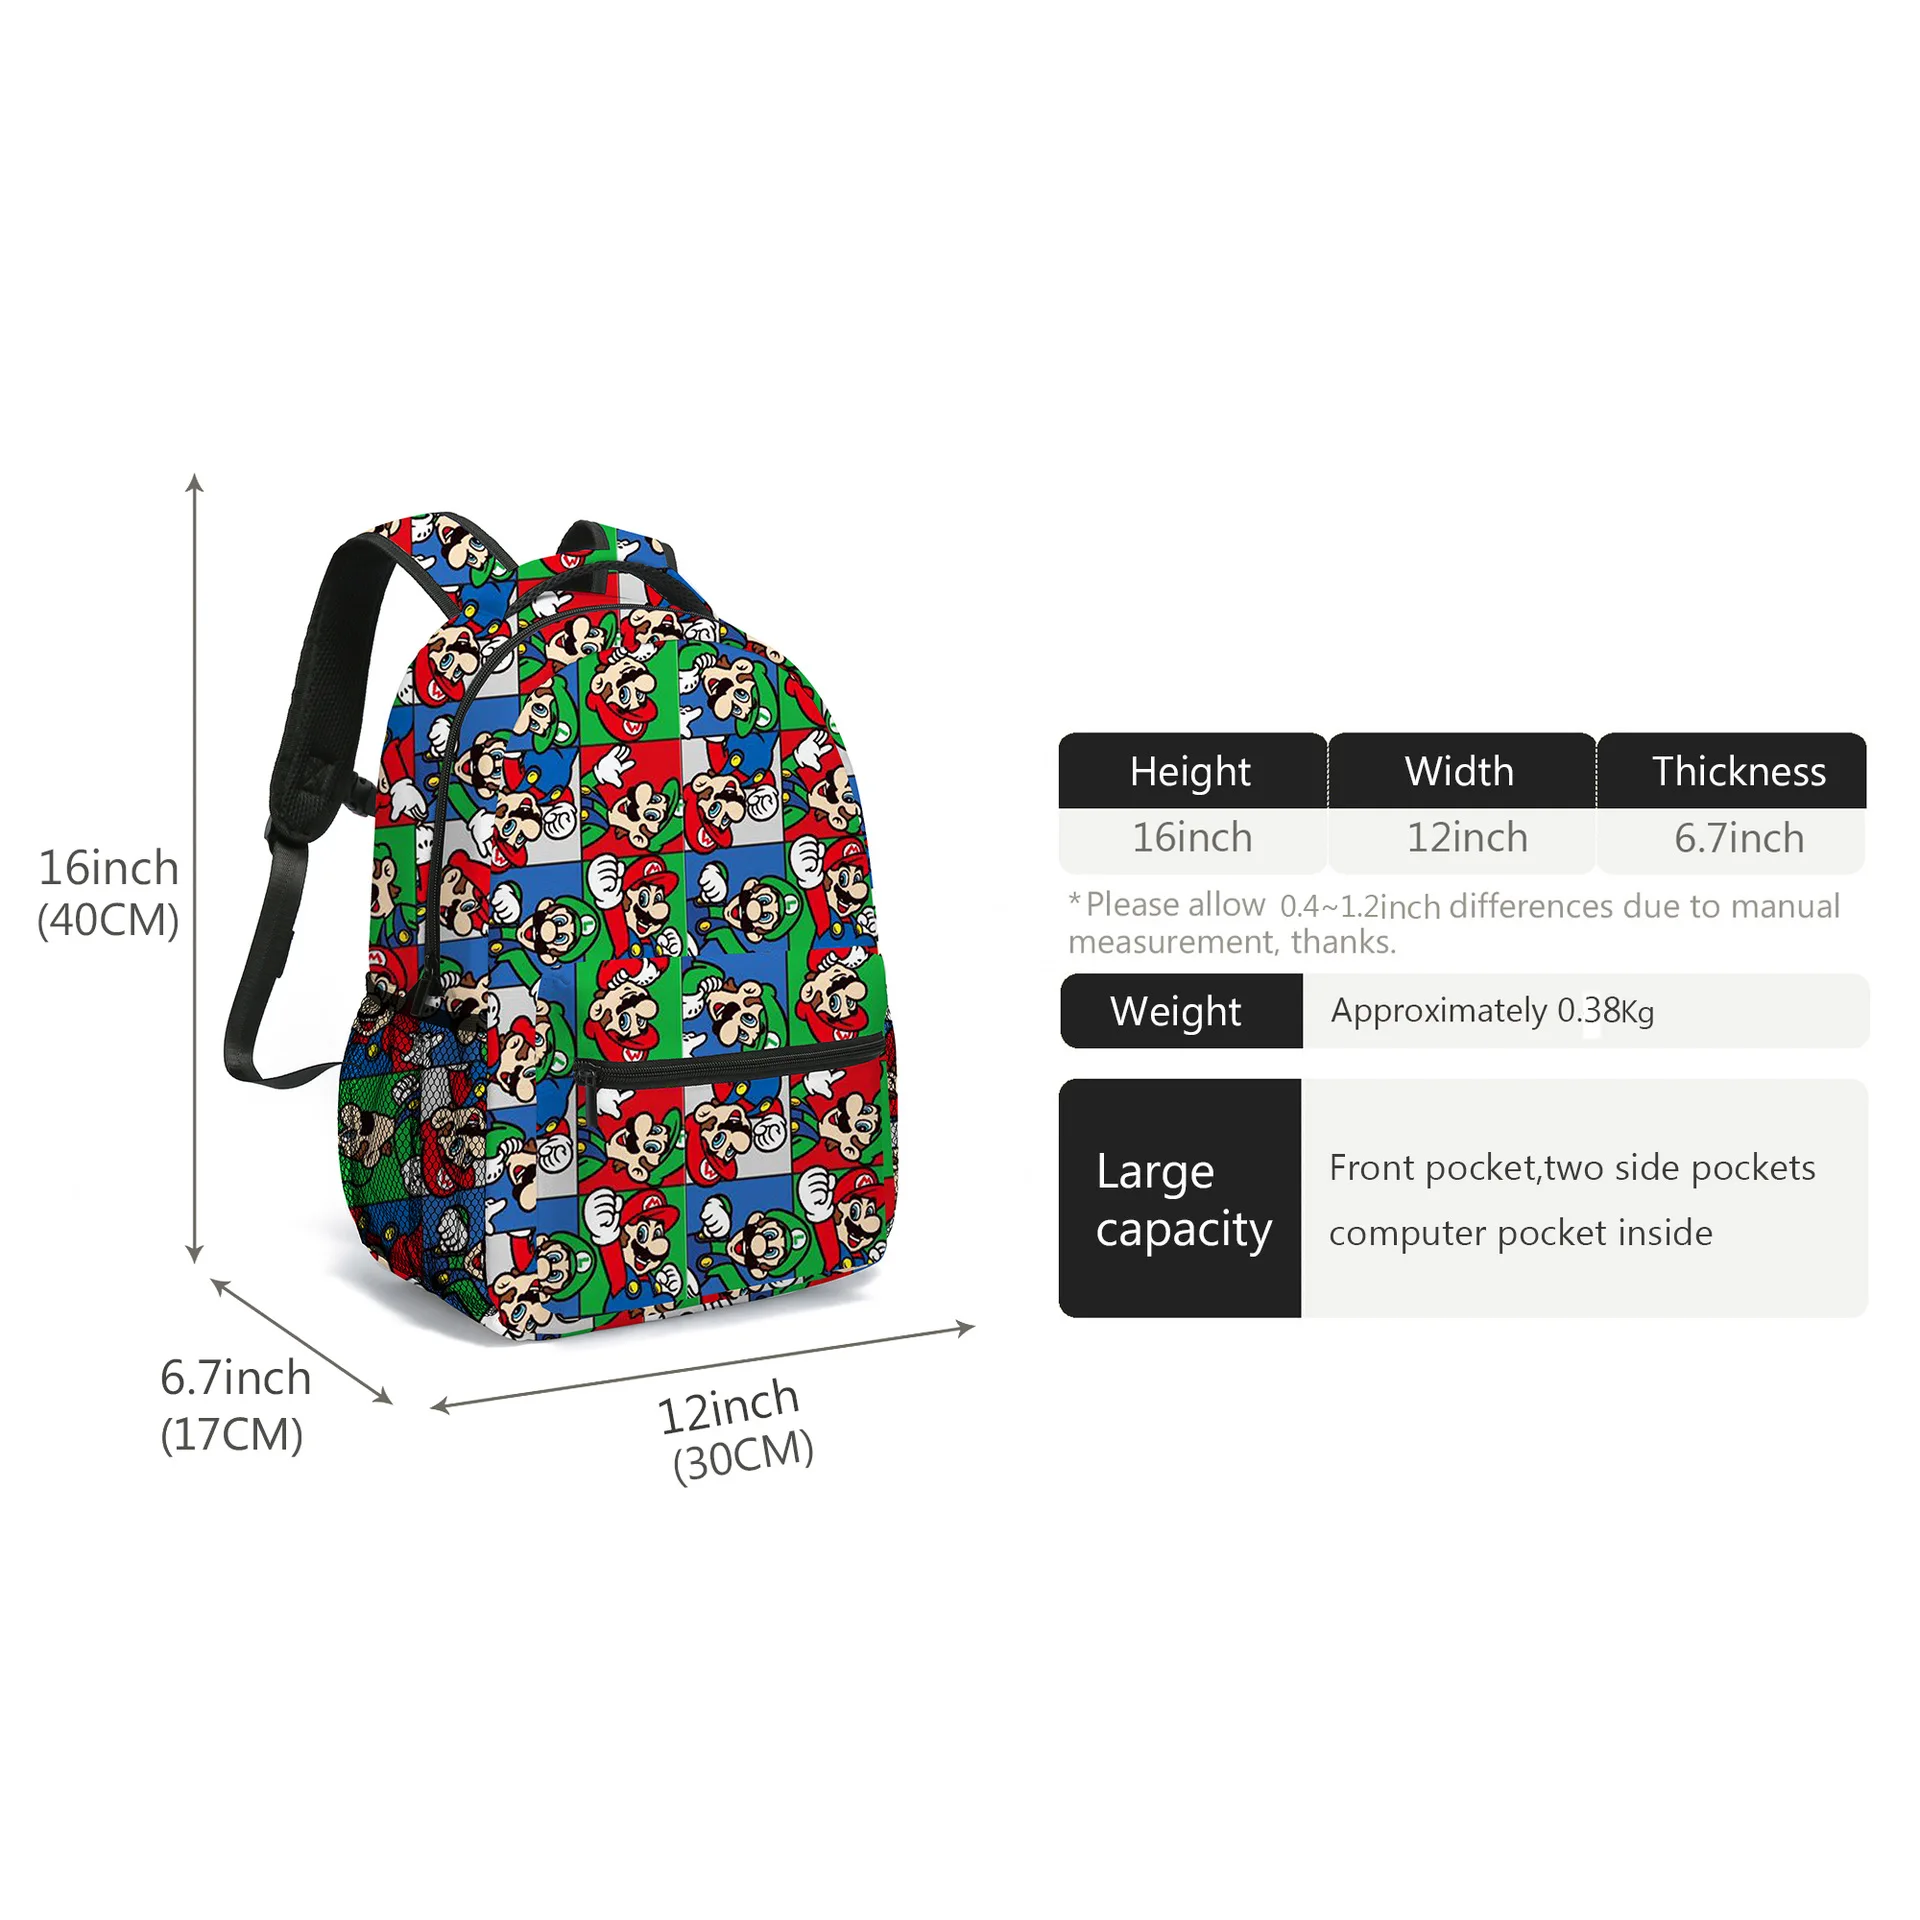 Hot selling cartoon full print backpack large capacity backpack primary school backpack load reduction and spine protection